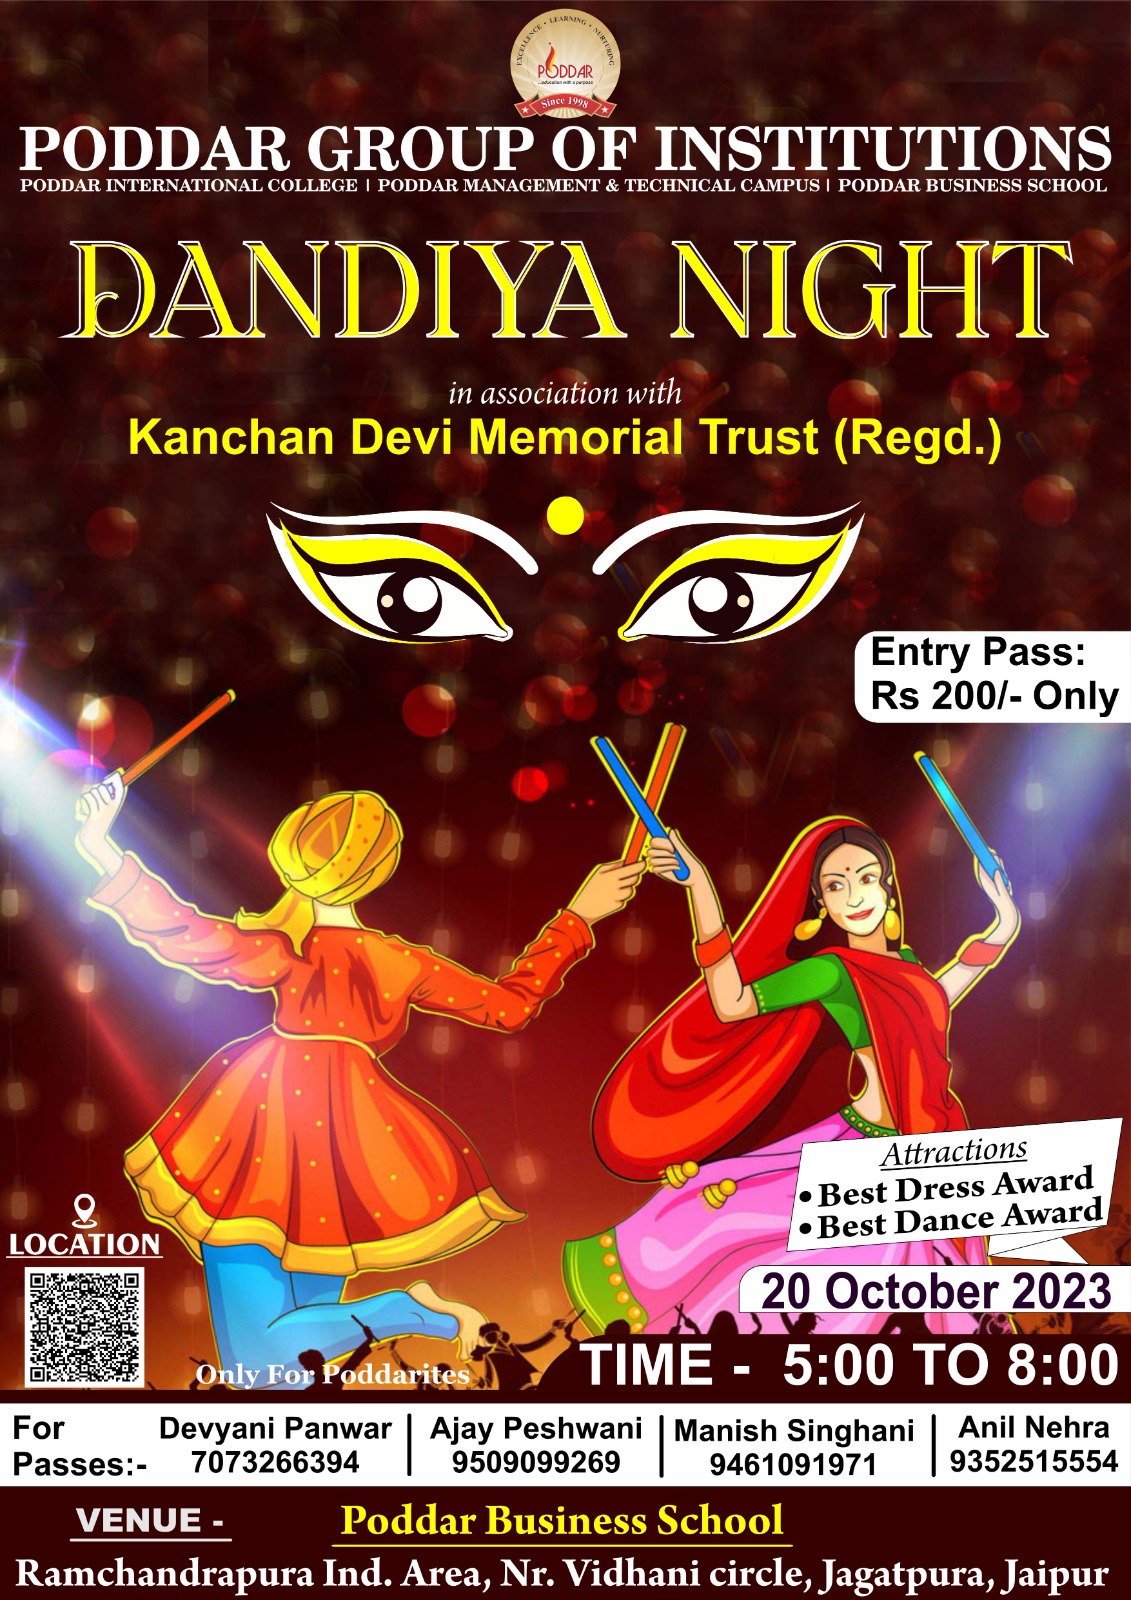 Get ready to groove and twirl at the happening event of the year—Dandiya Night!